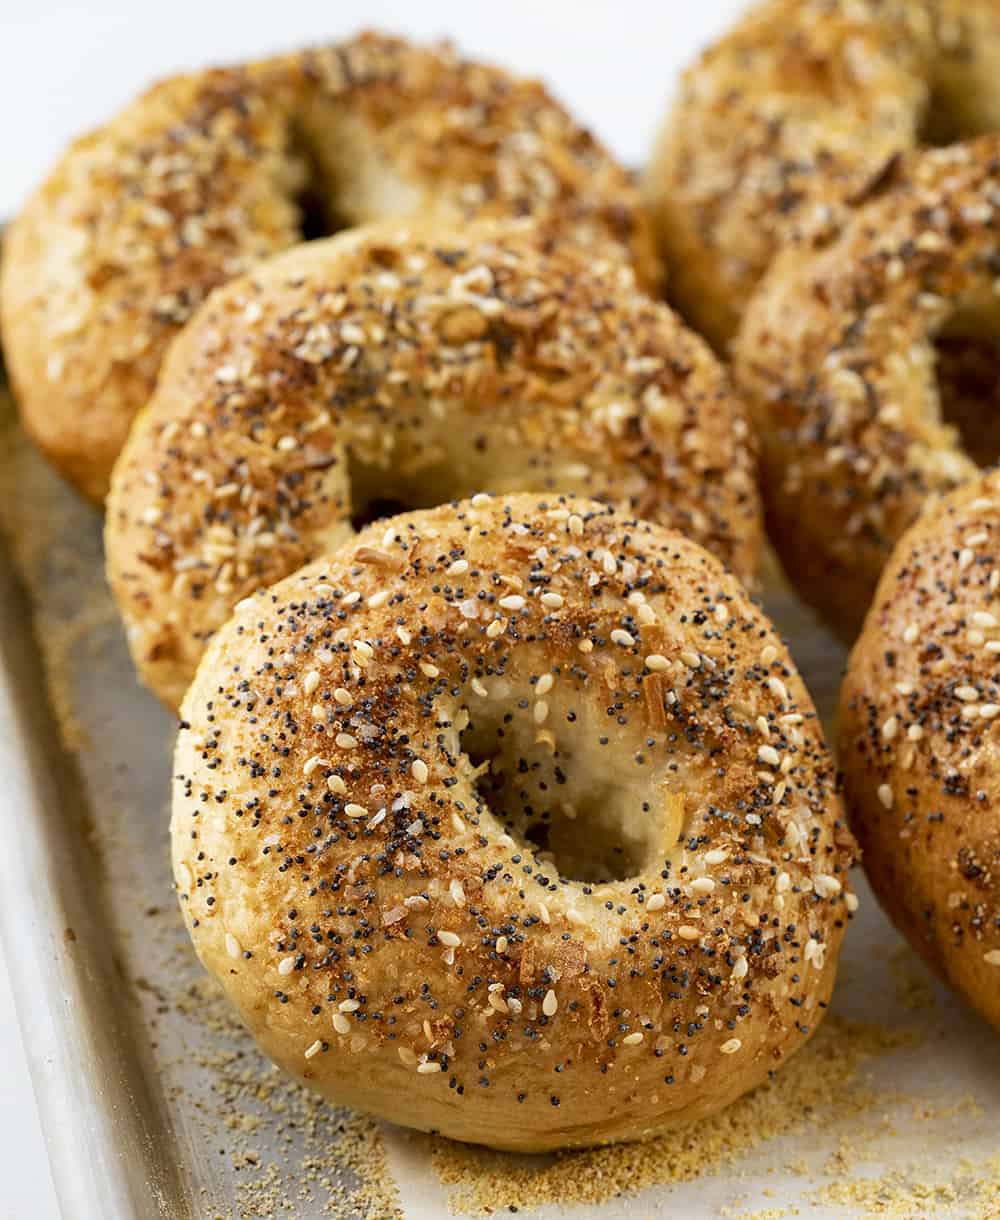 Whats on a Everything Bagel? 